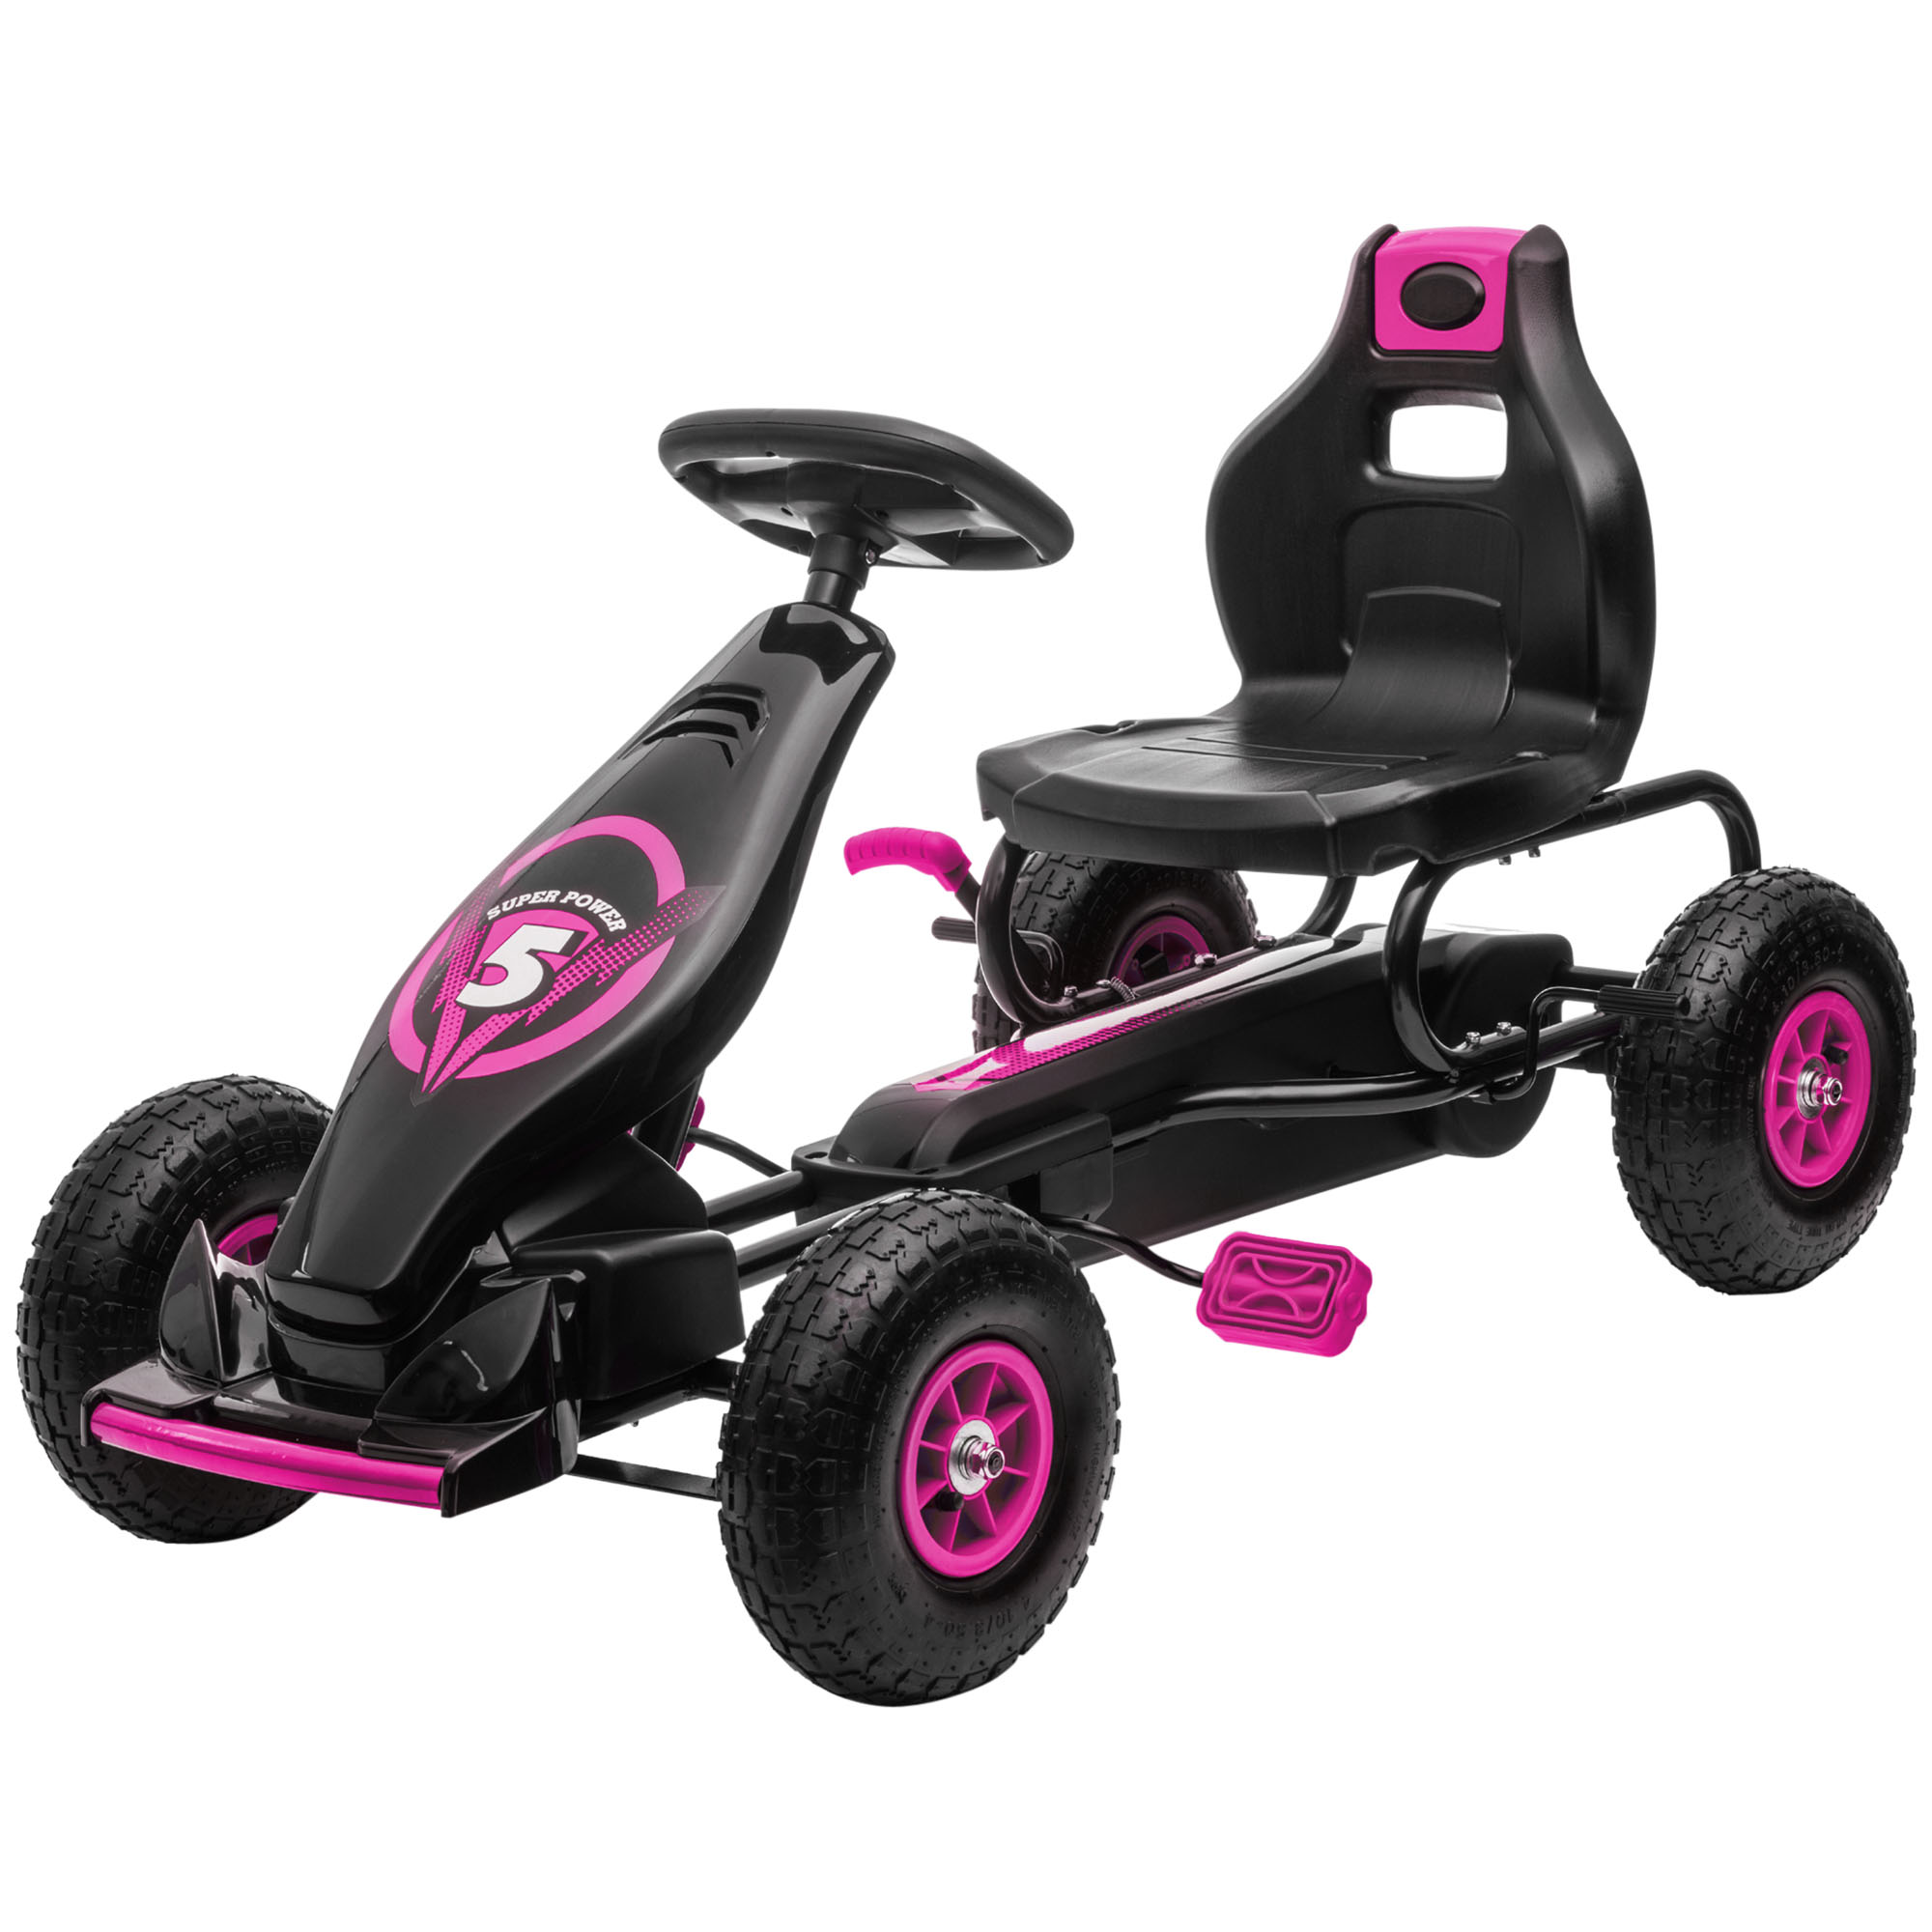 Aosom Ergonomic Pedal Go Kart Kids Ride-on Toy with Tough, Wear-Resistant Tread for Boys & Girls, Ages 5-12, Pink